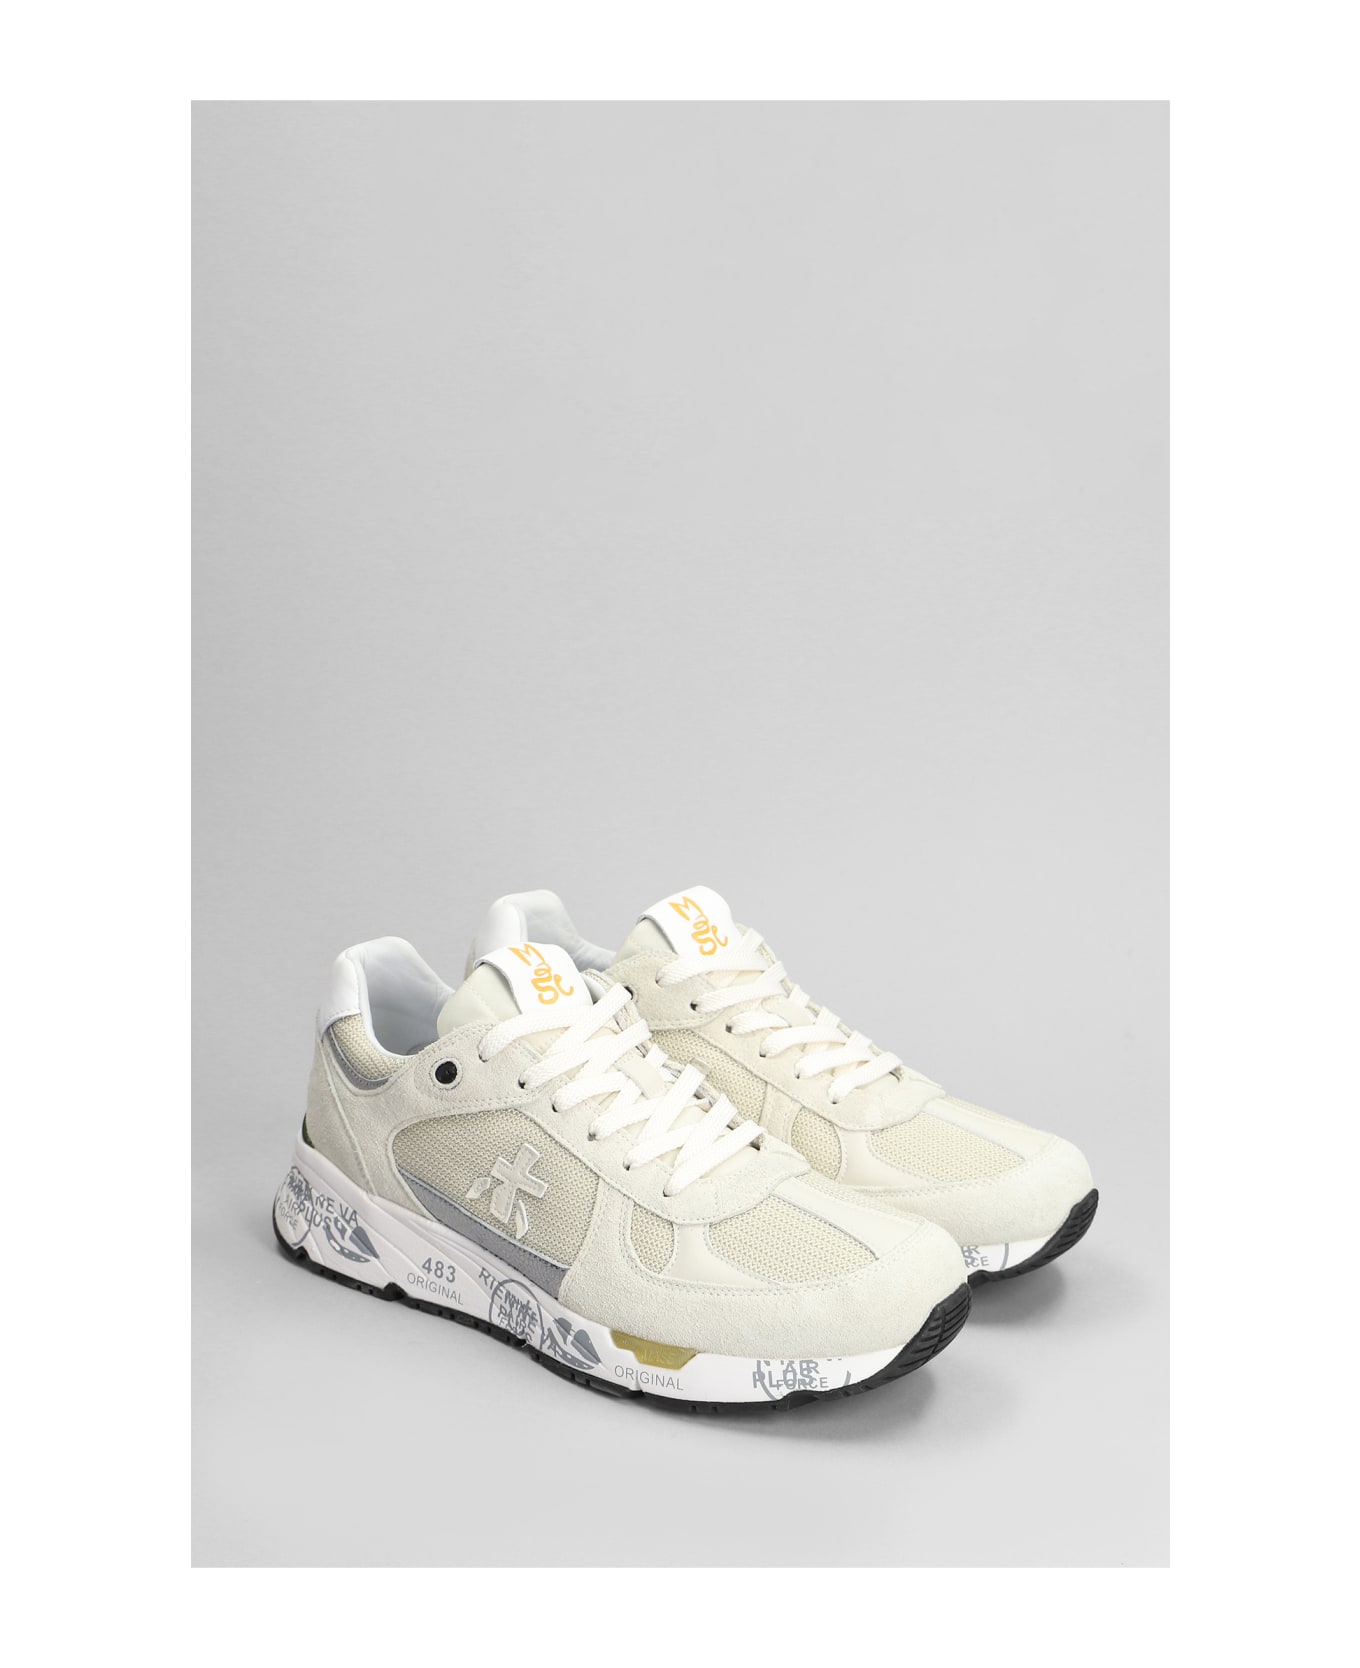 Premiata Mase Sneakers In Beige Suede And Fabric - Beige